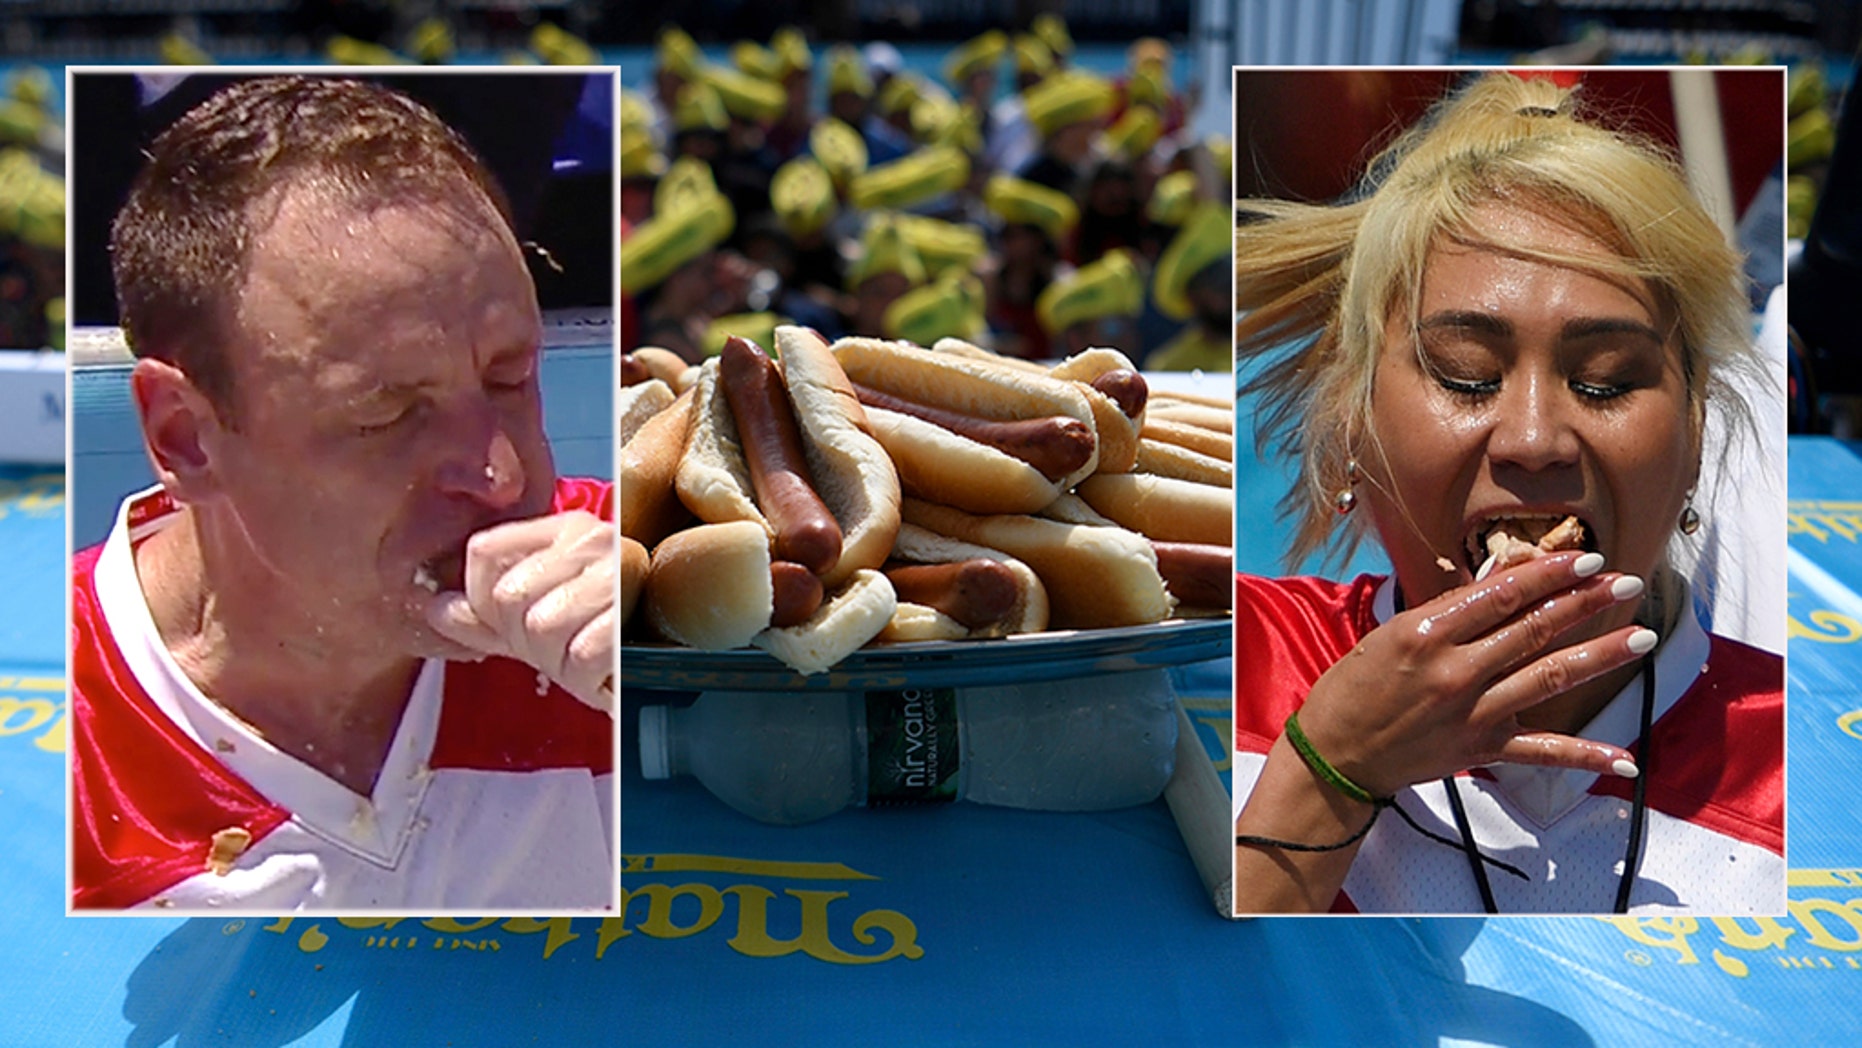 Joey Chestnut, Miki Sudo clinch victory in Nathan’s Hot Dog Eating